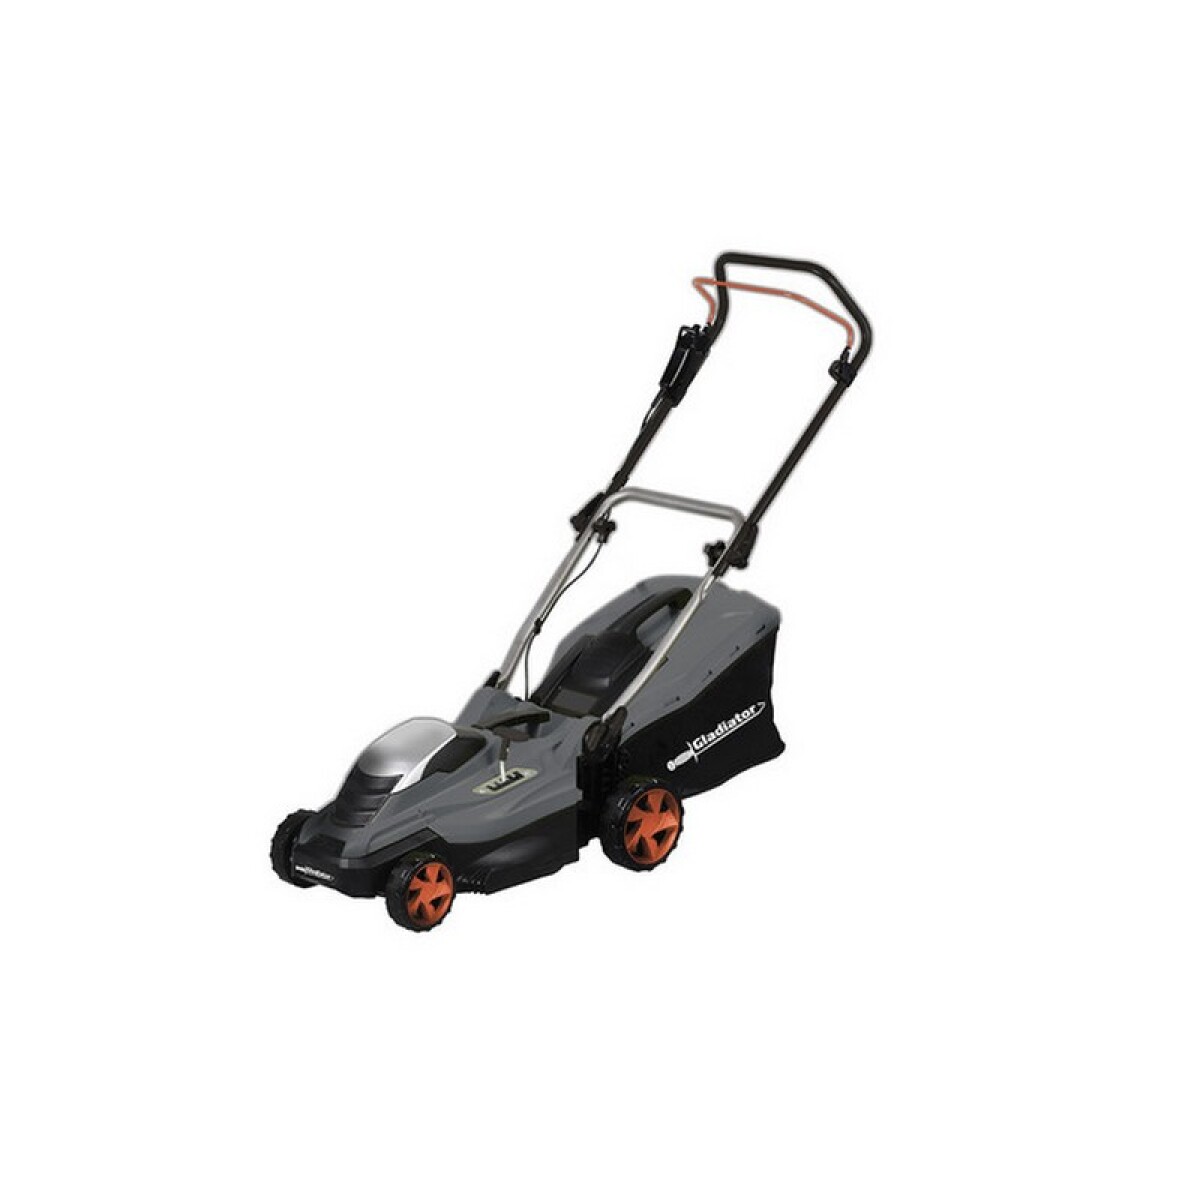 CORTACESPED ELECTRICA GLADIATOR 330 MM 1300 W CON RECOLECTOR 